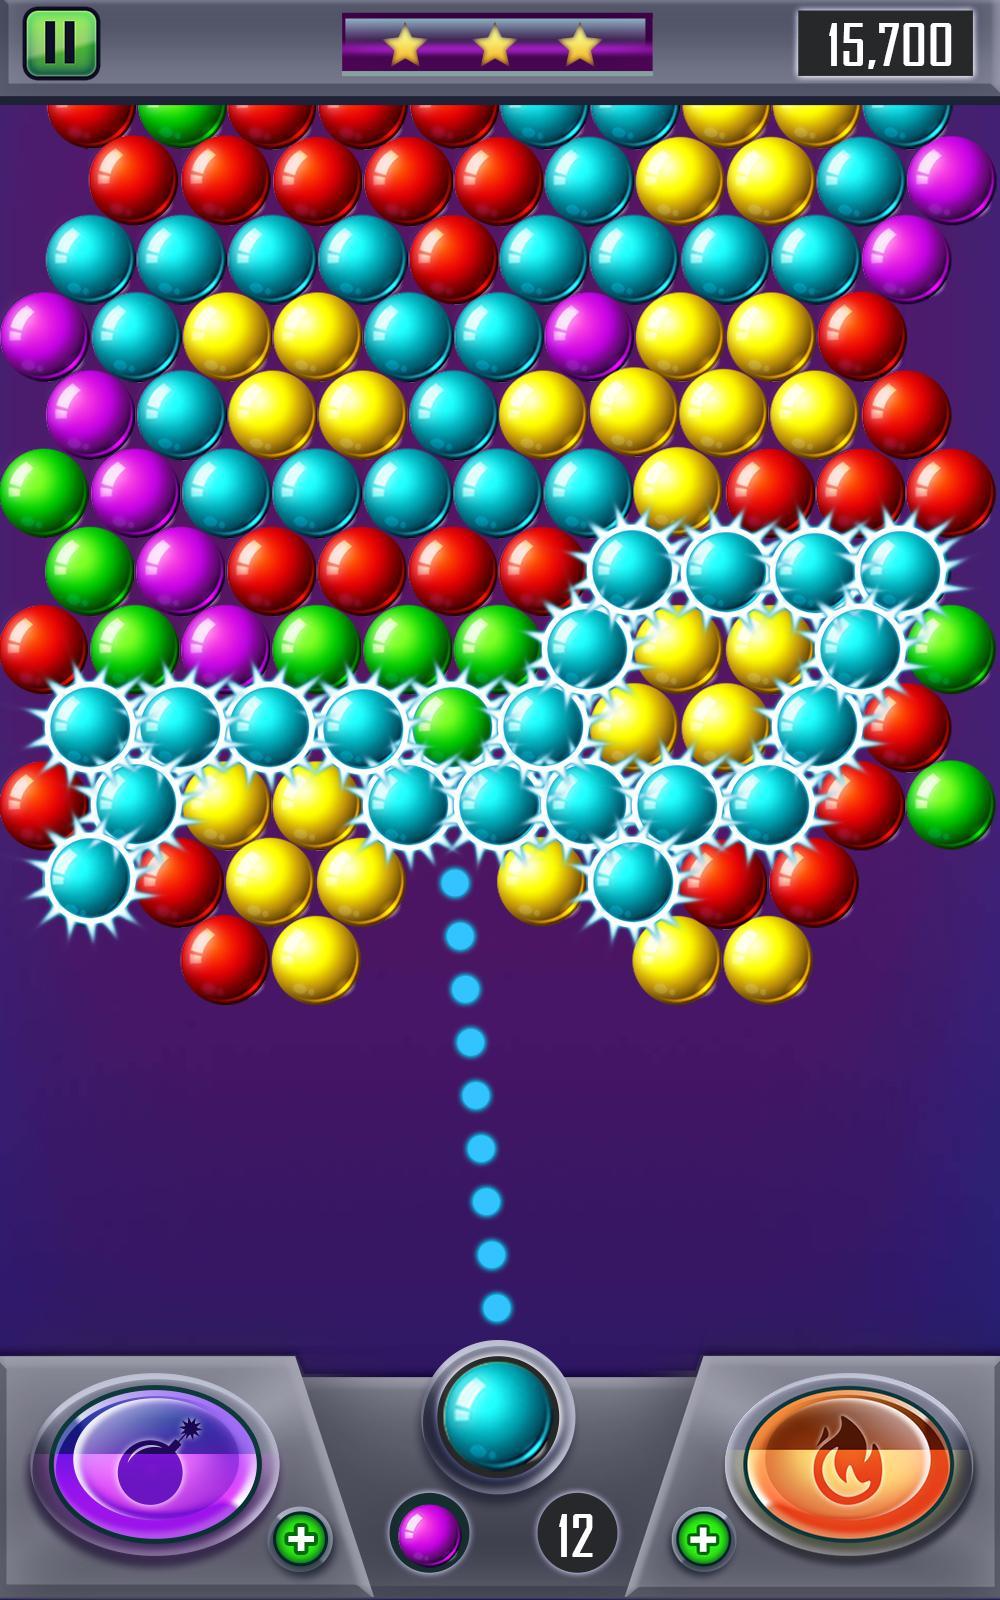 Bubble Champion for Android - APK Download